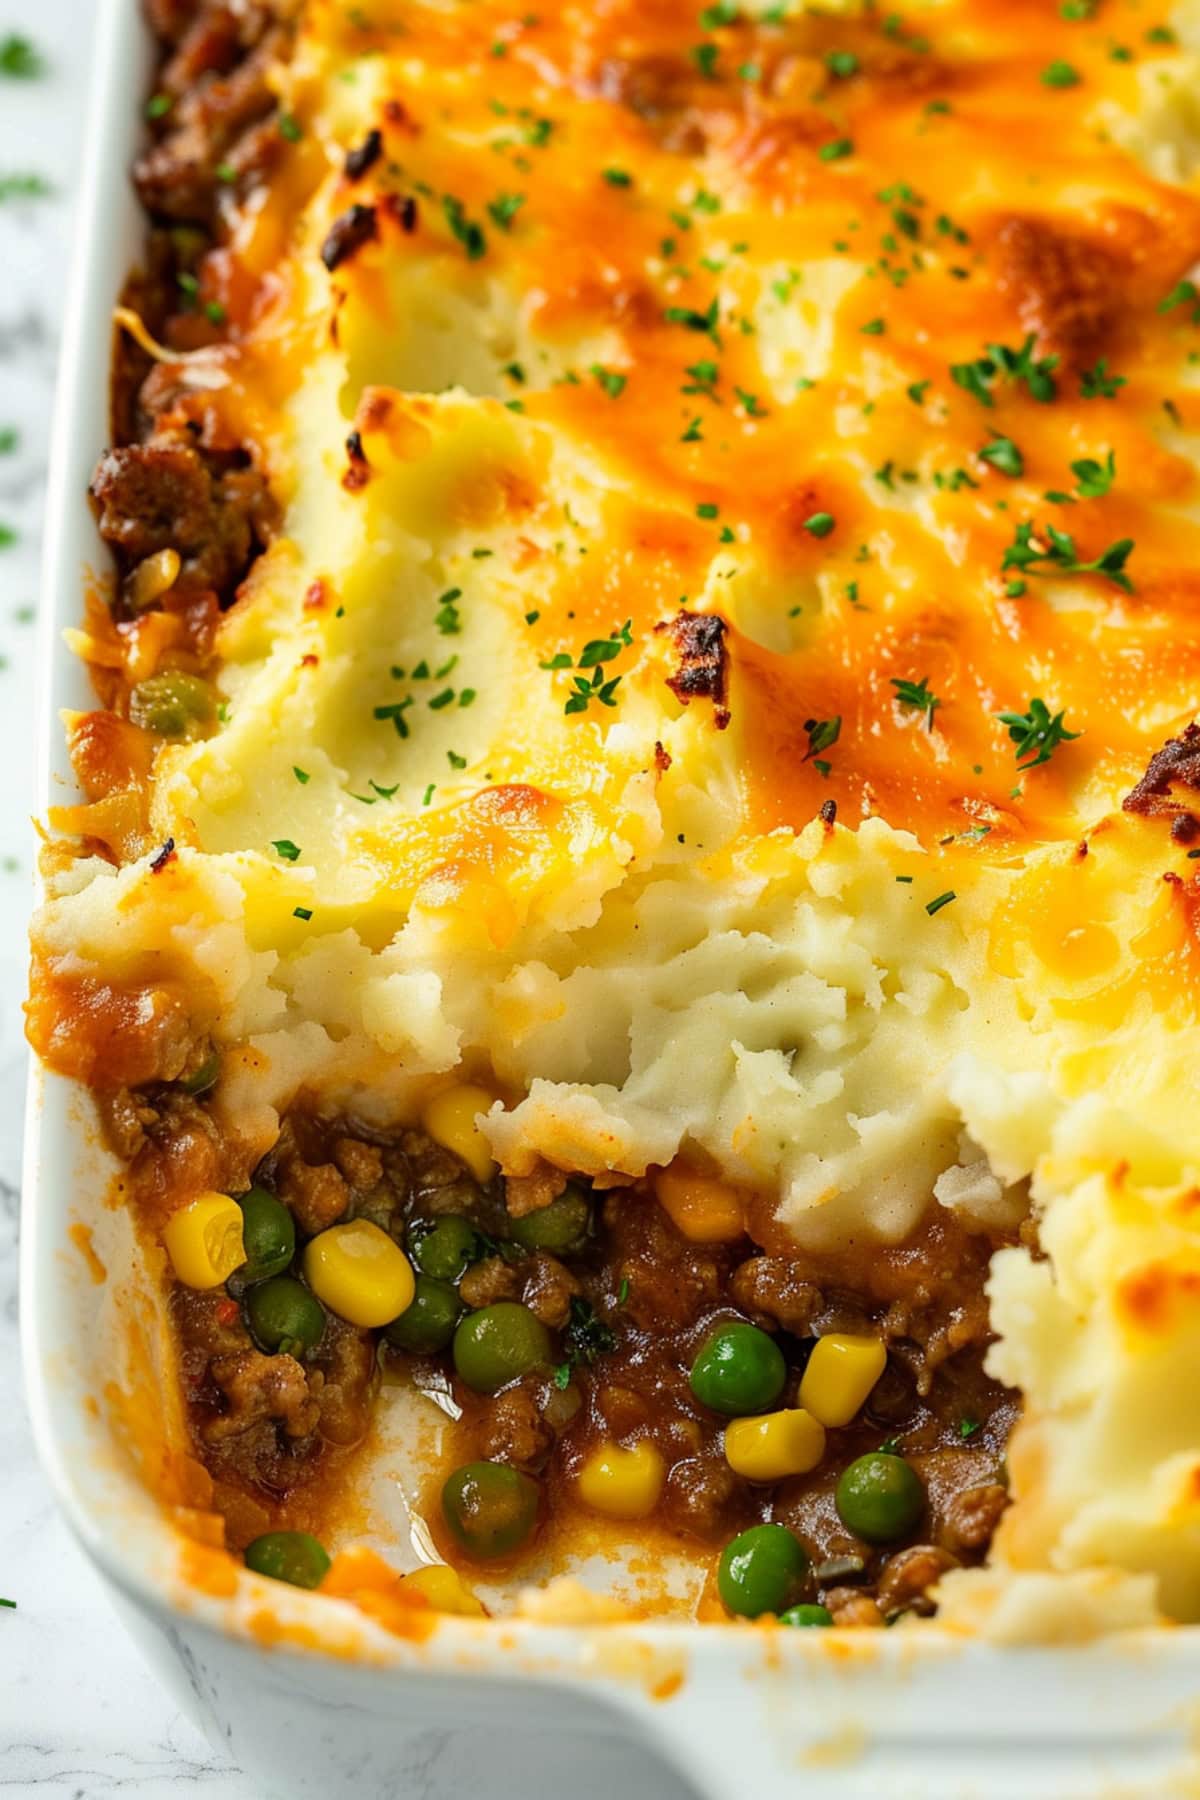 Shepherd's pie in a baking dish with a portion scooped out